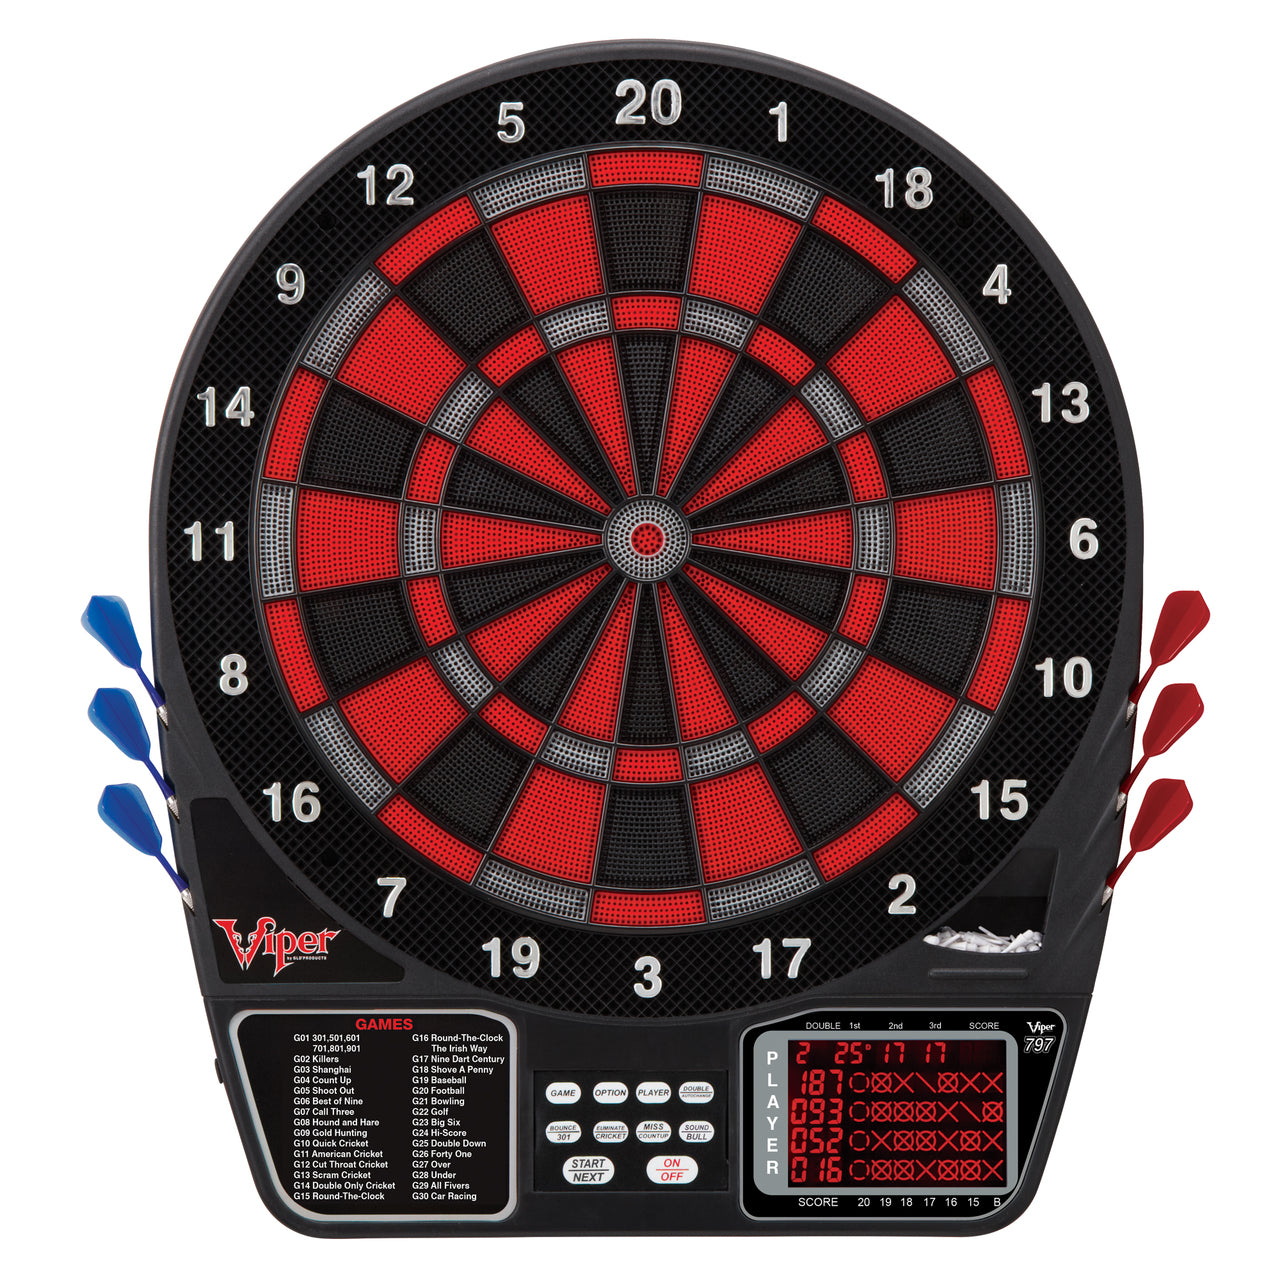 Solid Success Dart surround catch ring in black, professional wall  protection without additional attachment, dartboard protection, catch ring